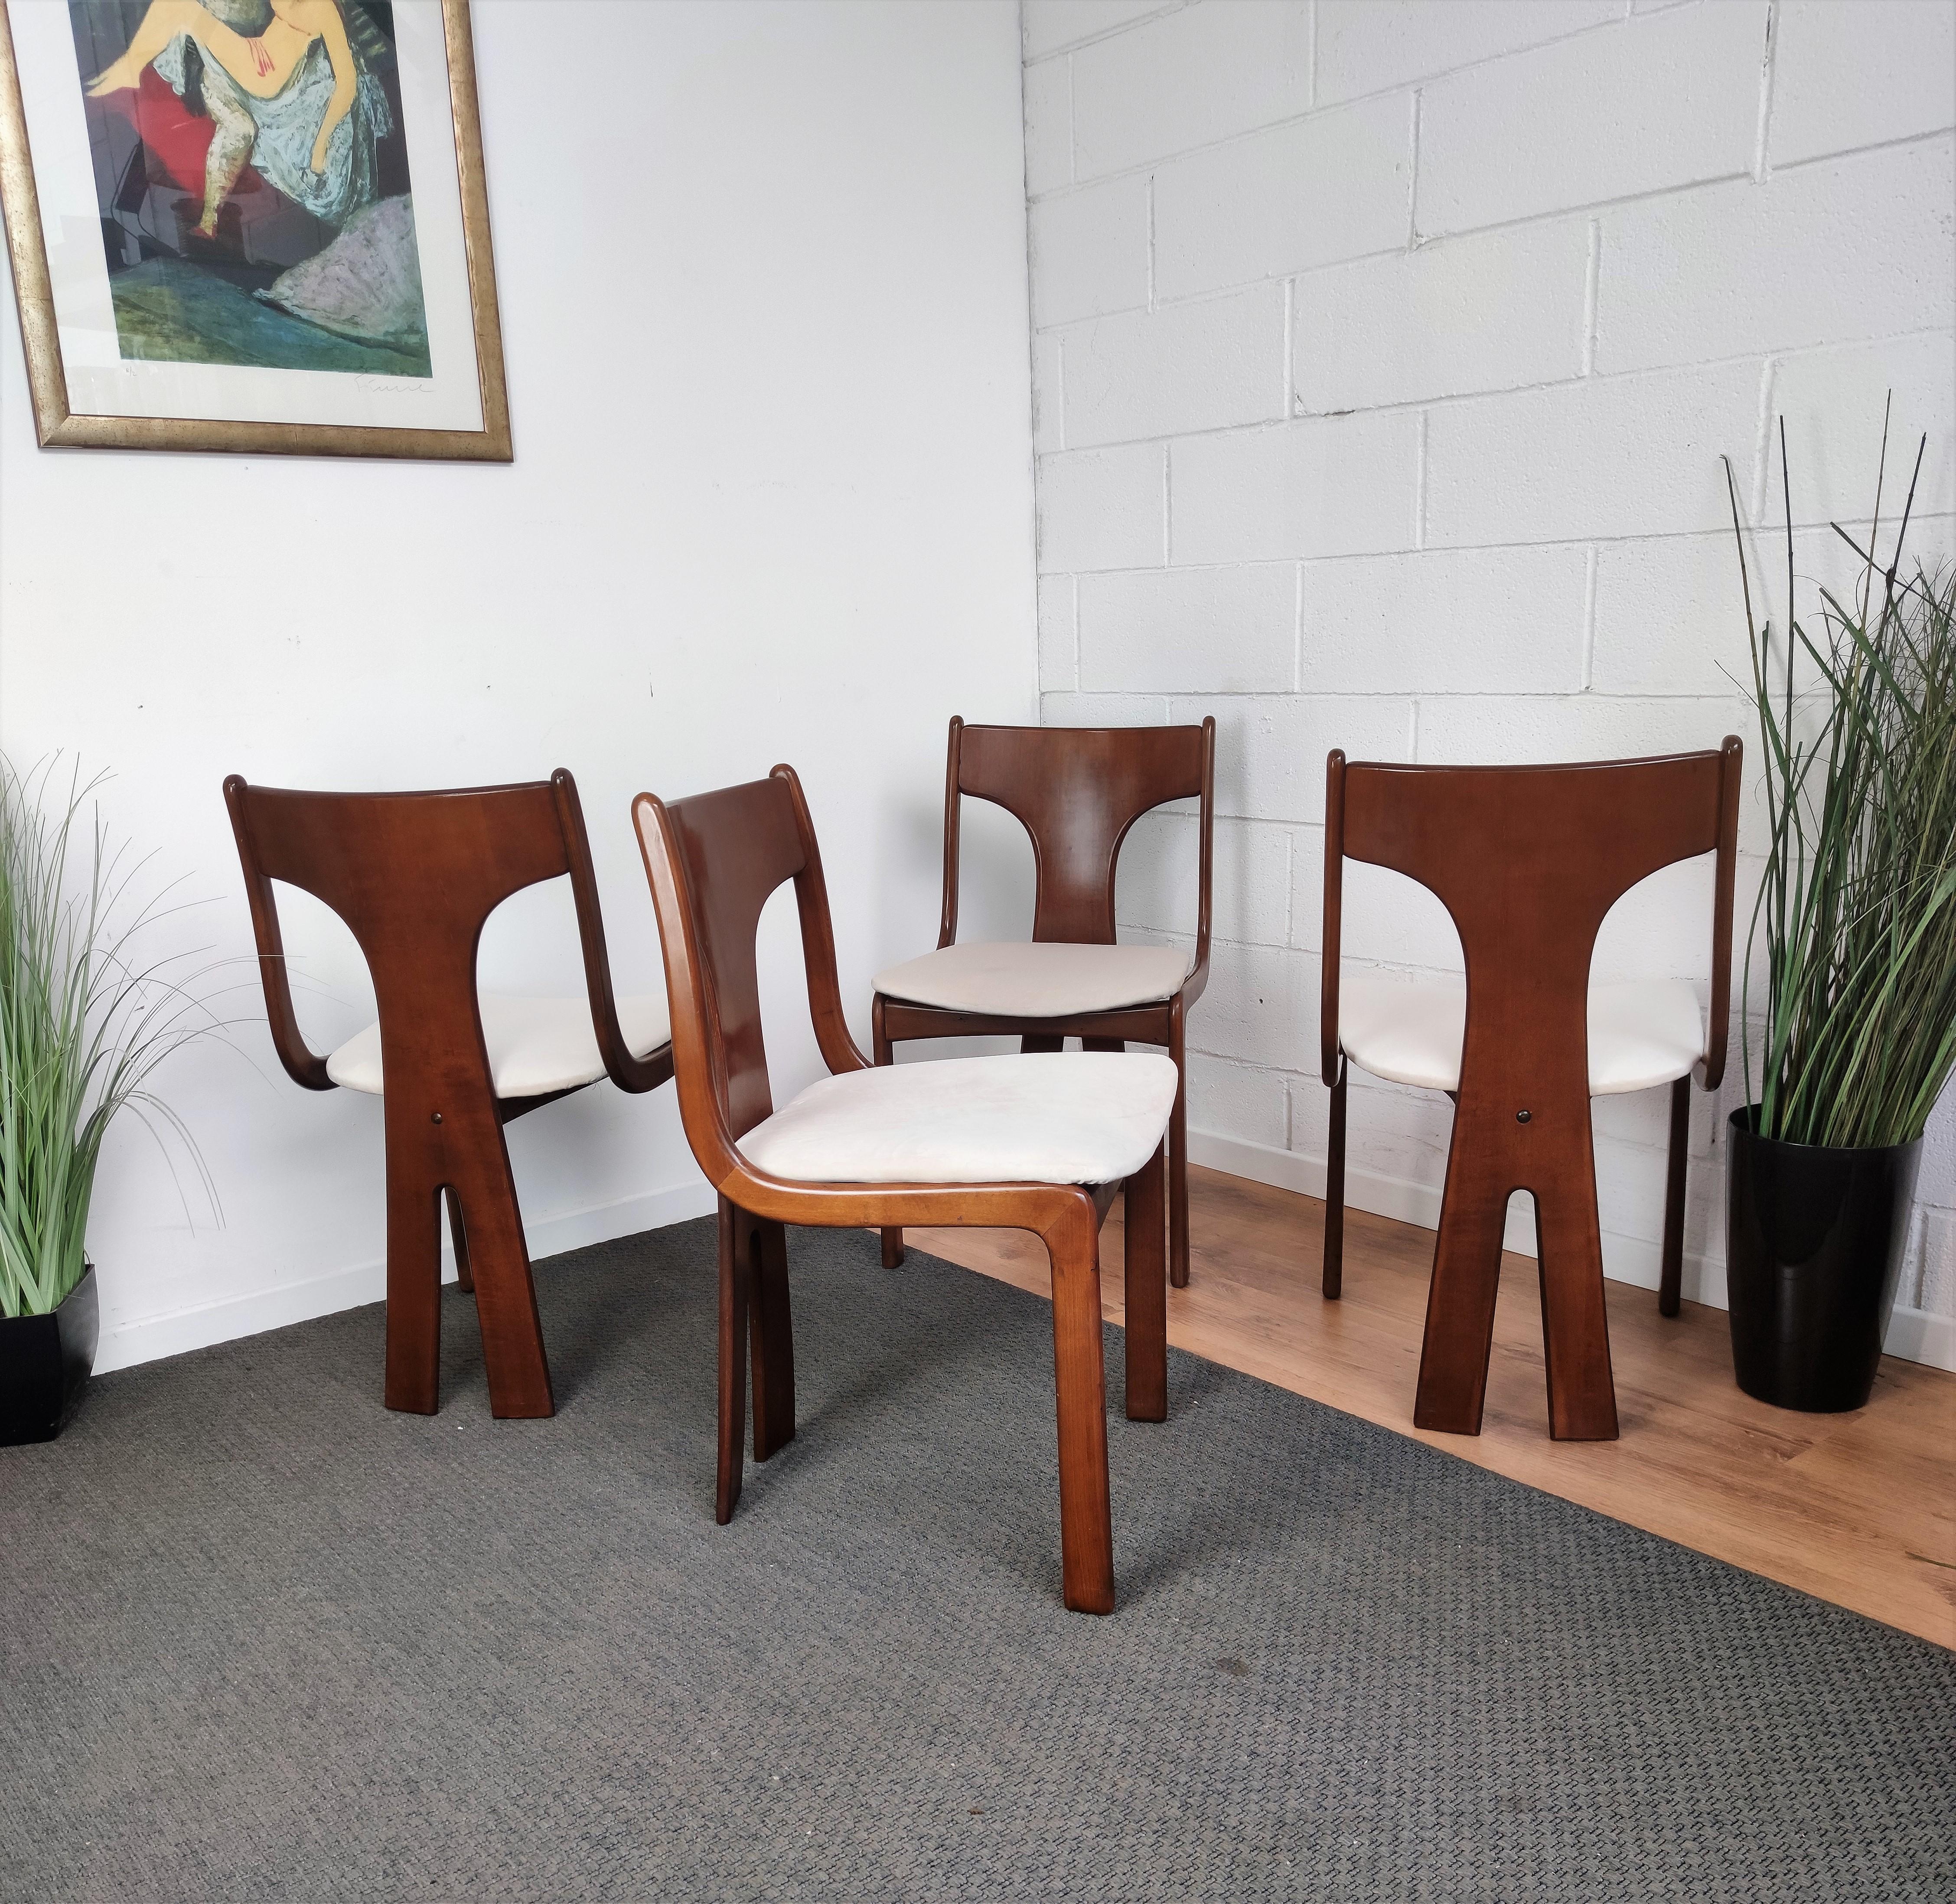 Set of 4 dining room chairs in the typical style of main Italian Mid-Century Modern designers such as Gio Ponti, Melchiorre Bega, Paolo Buffa and Ico and Luisa Parisi with newly upholsterd seat in gray white velvet.
The distinguishing features of